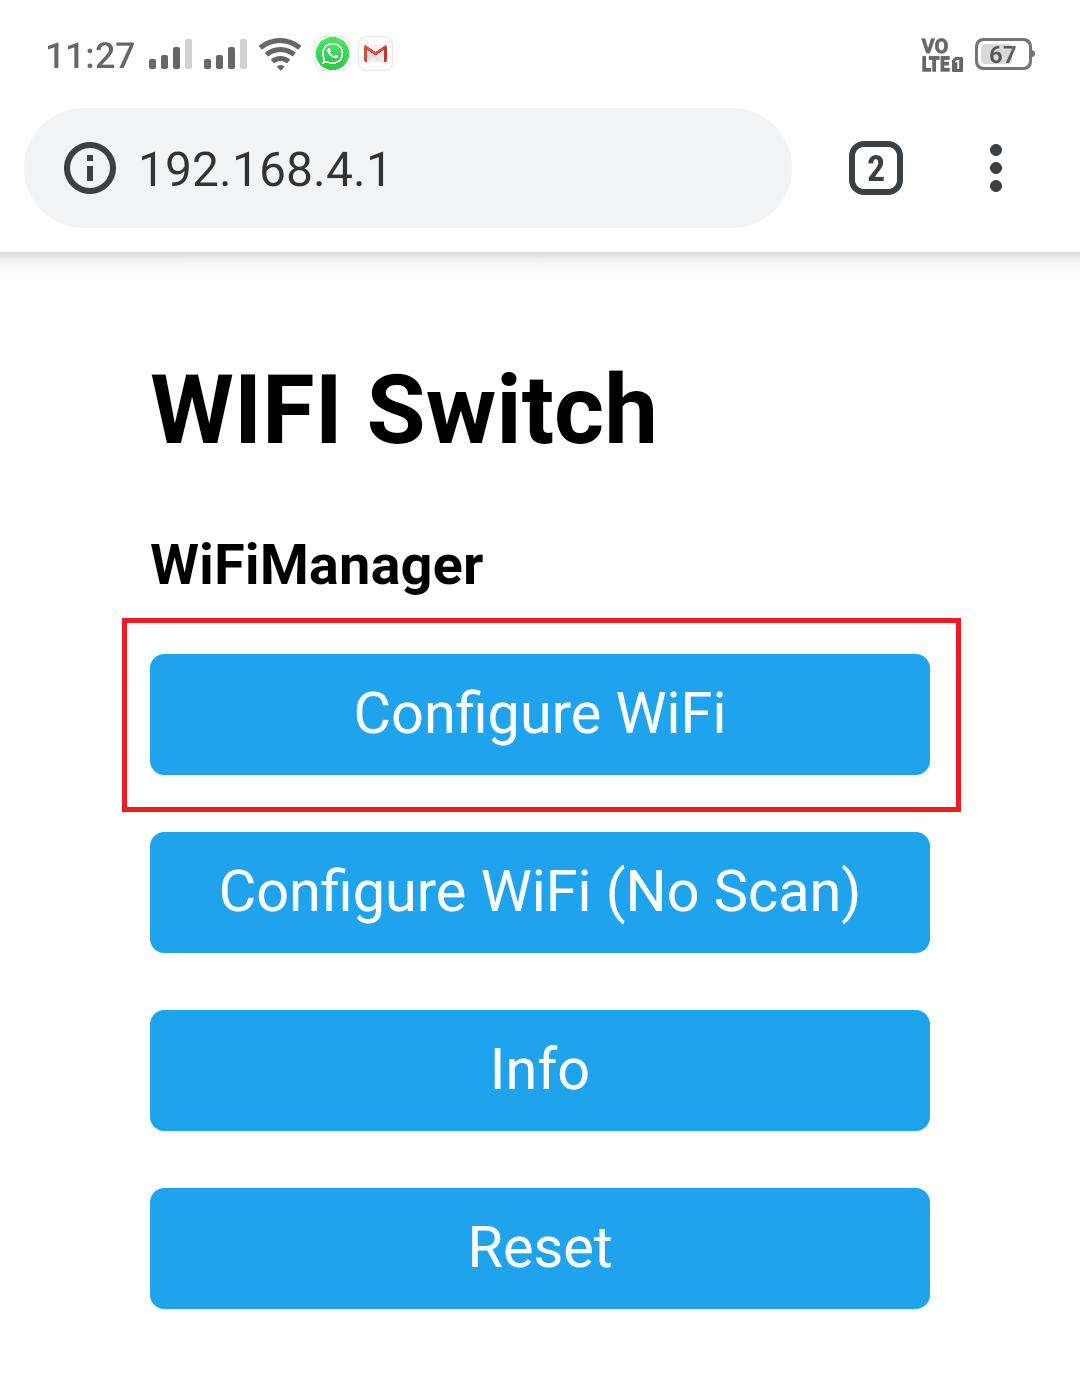 wifi manager